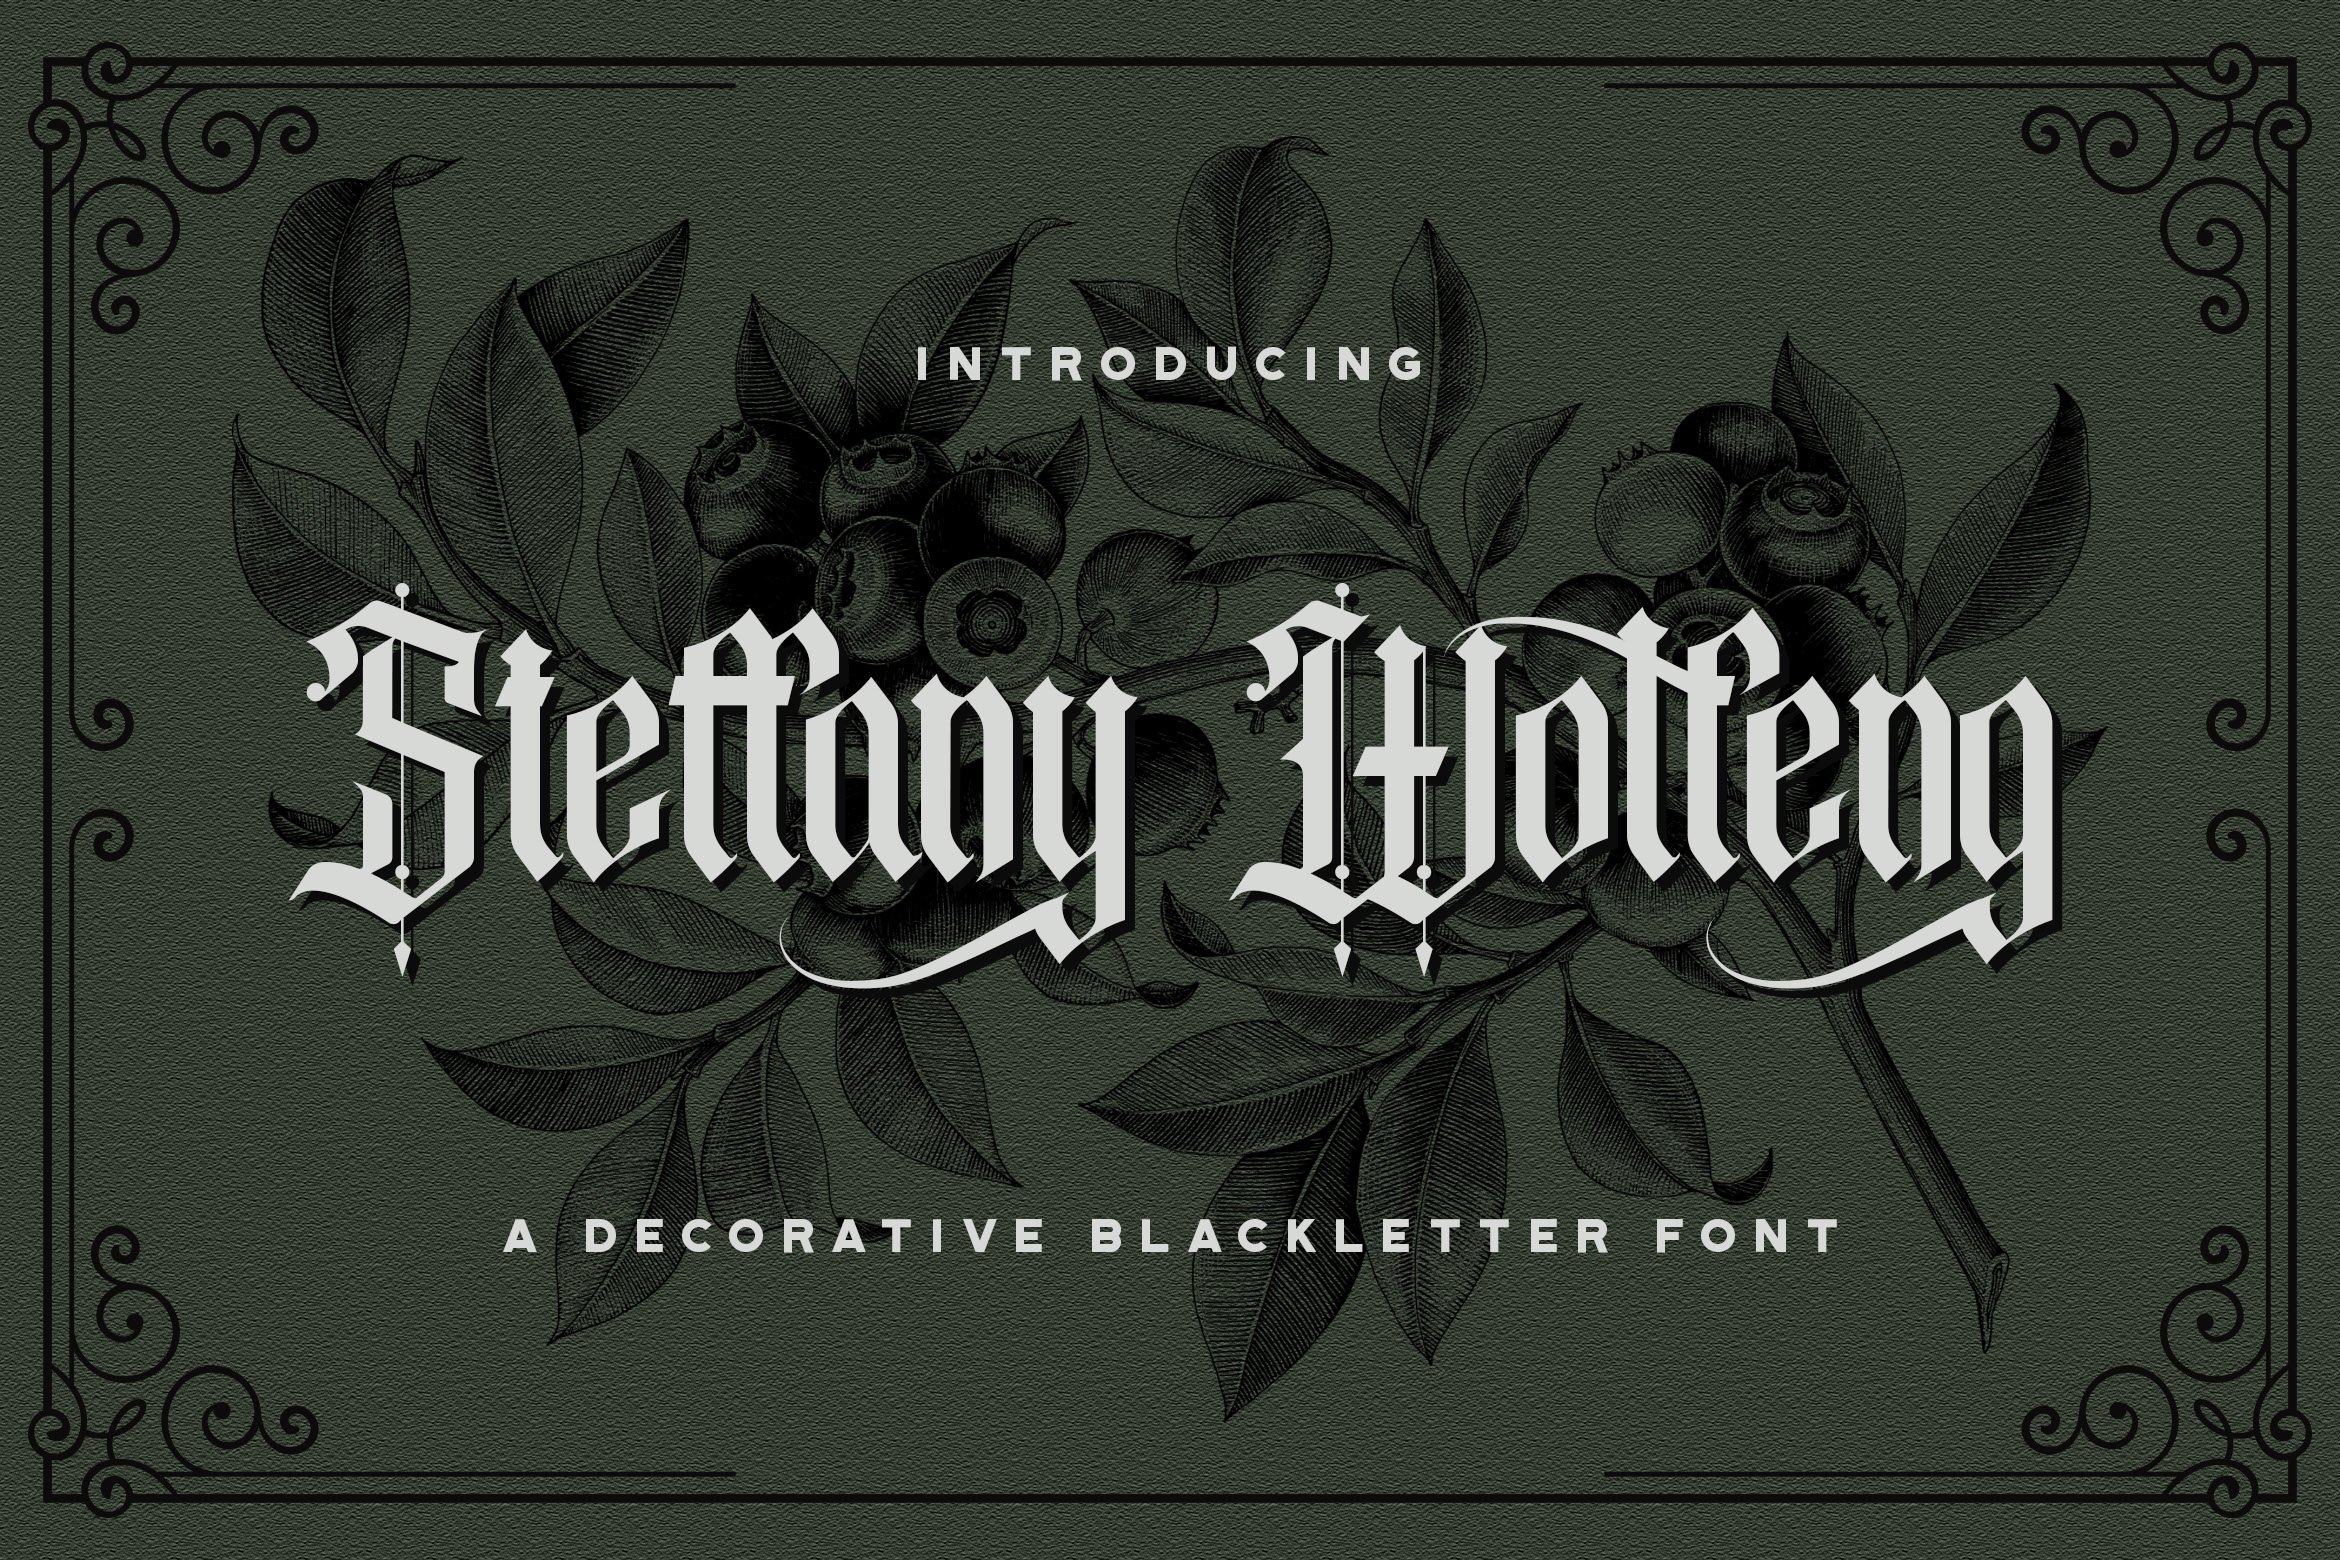 Steffany Wolfeng - Blackletter Font cover image.